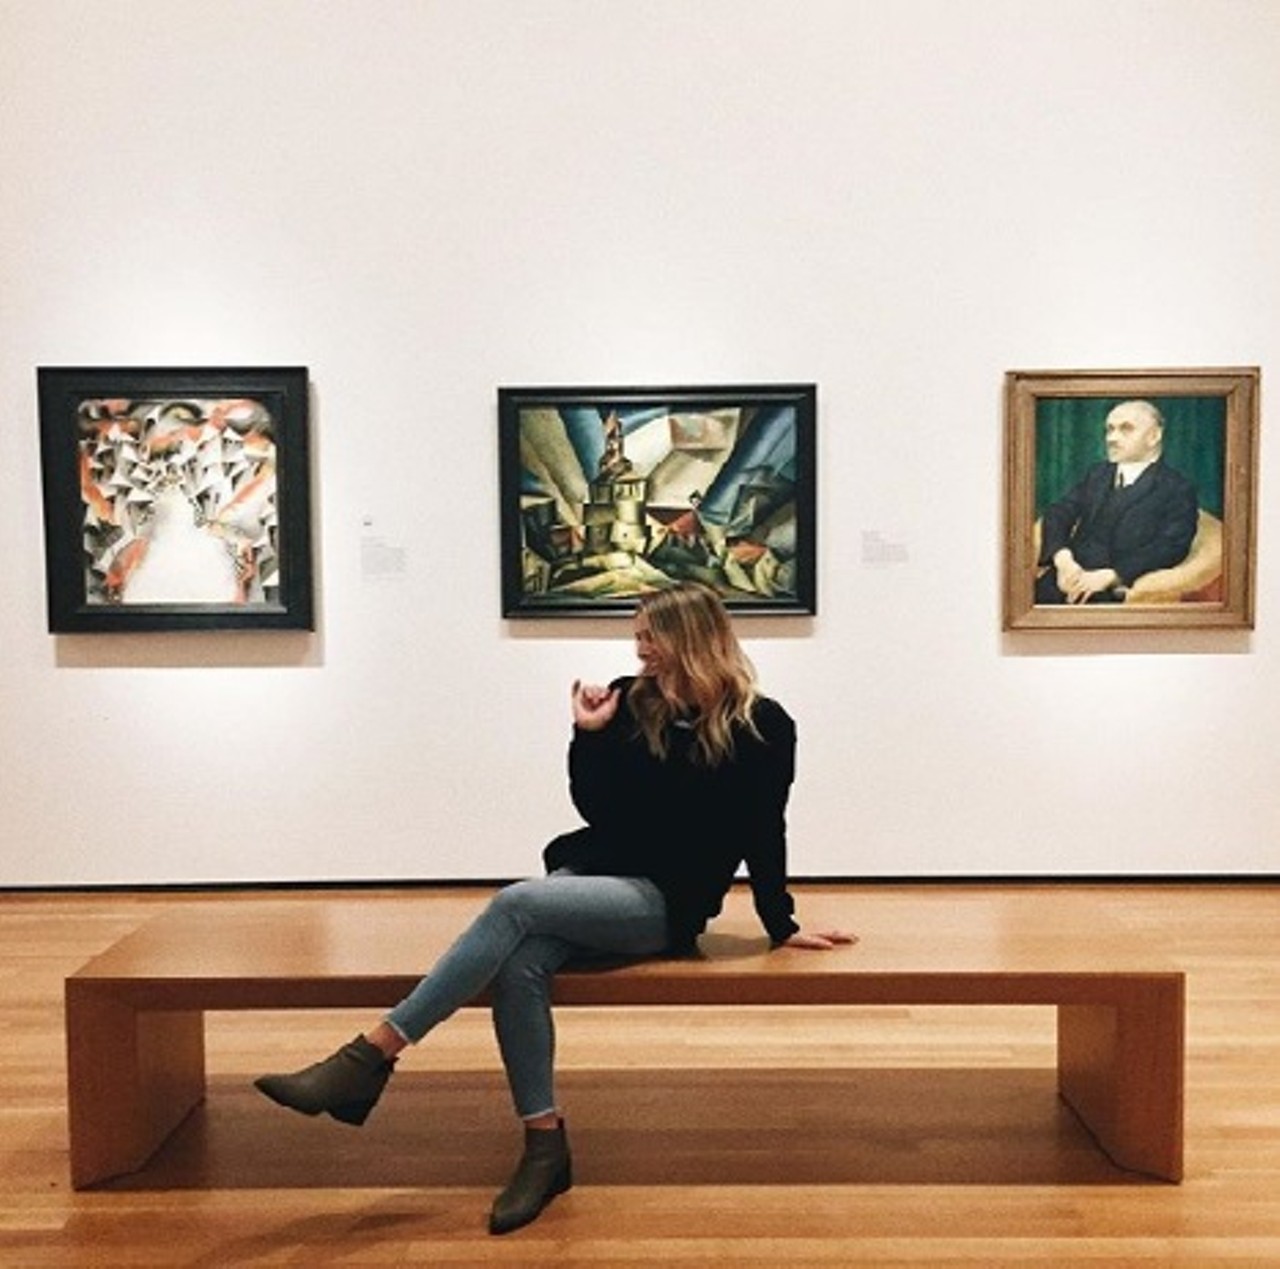 Cleveland Museum of Art
Cleveland Museum of Art, East Blvd., 877-262-4748
Totally obvious, but this spot has been a cultural institution in Cleveland for more than a Century for a reason, it's incredible, and mostly free. 
Photo via aileen.kanarskaya/Instagram